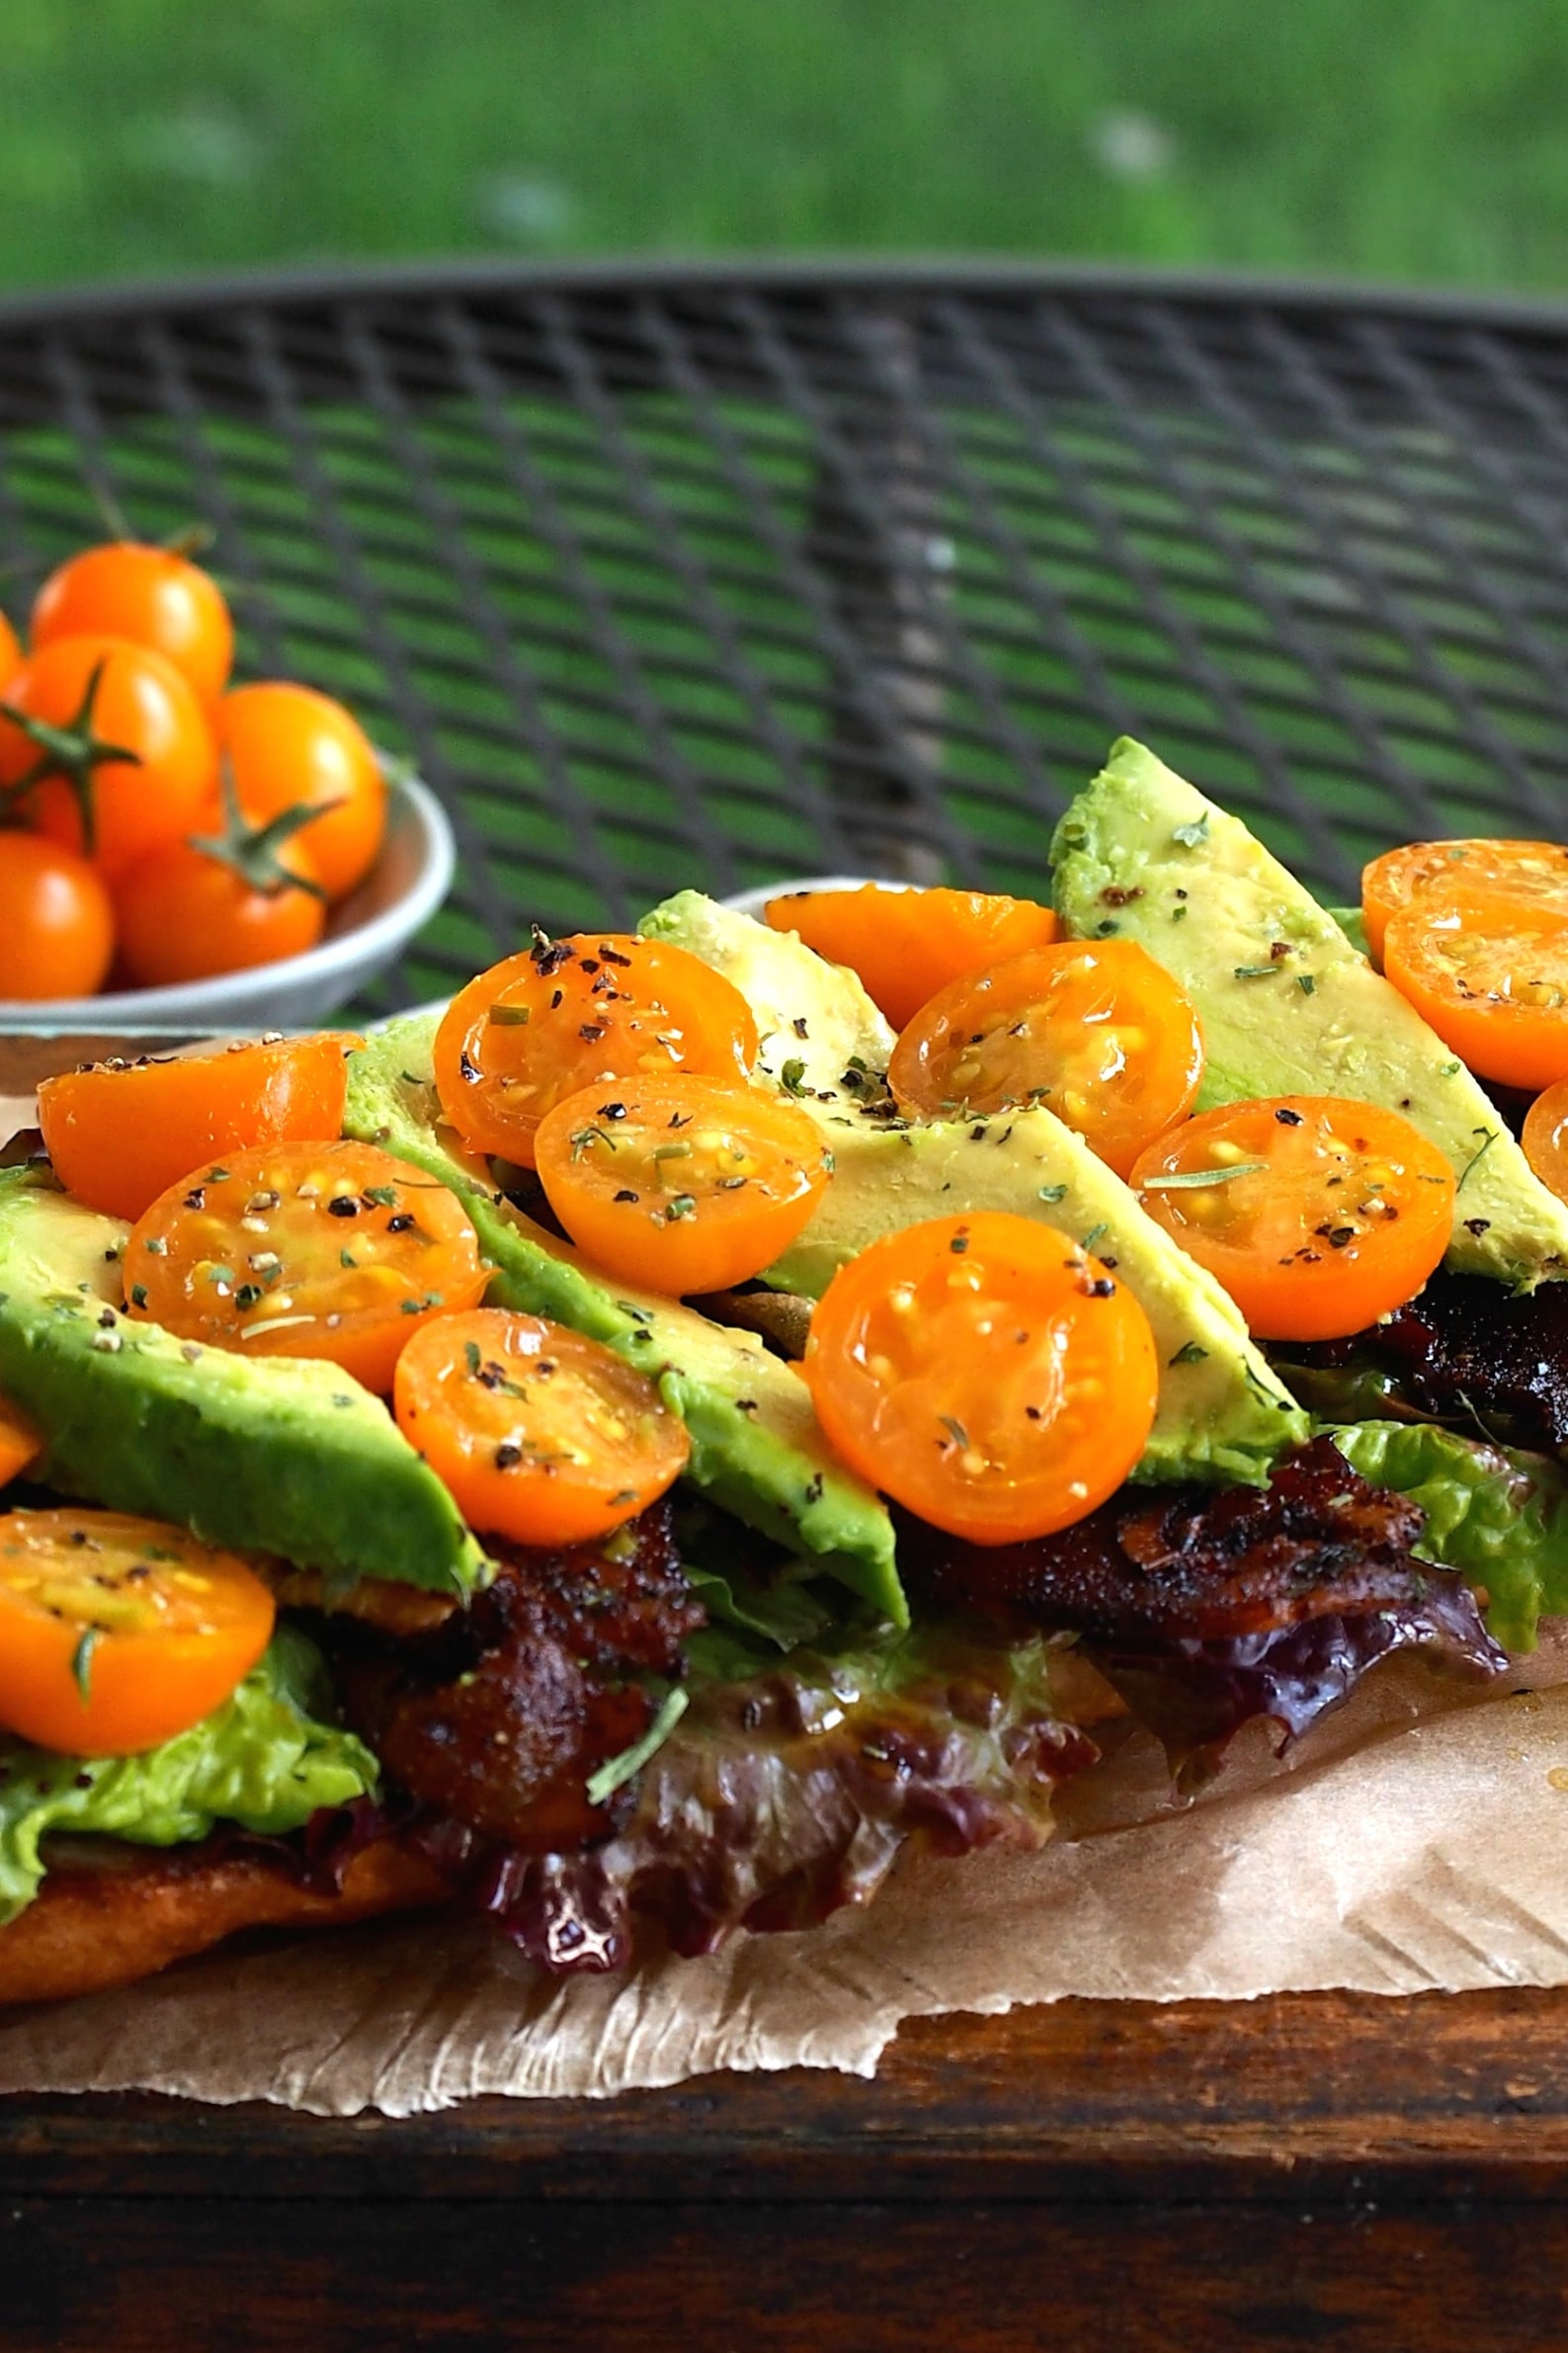 Perfect BLT with Sweet Spicy Bacon & Avocado. Yes, THE perfect BLT with sweet, spicy bacon and avocados. After one bite, you will think you are in Heaven. Simply Sated